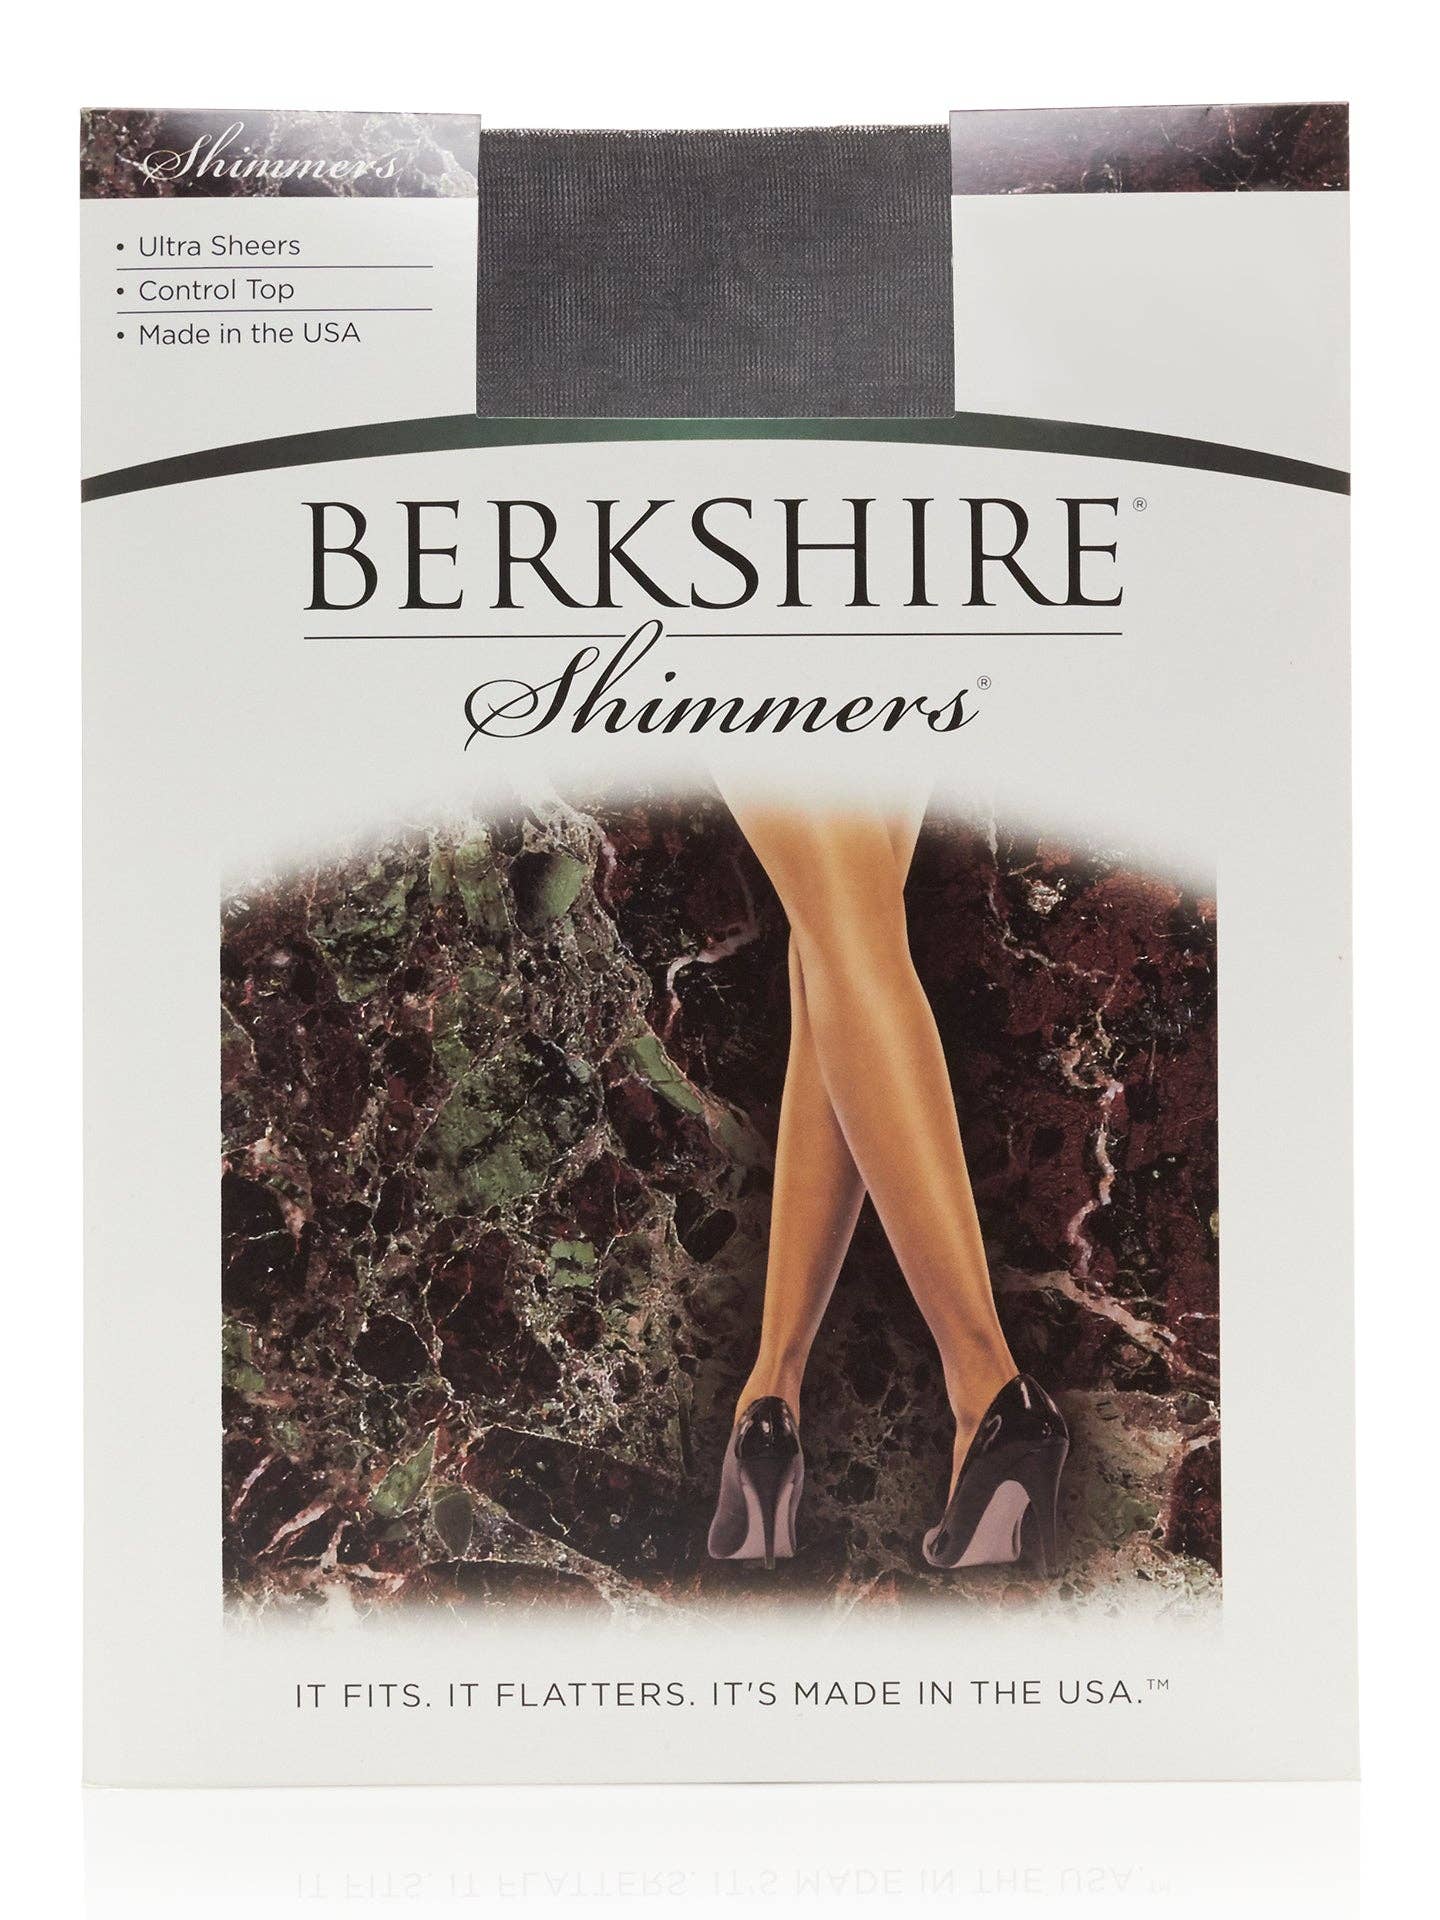 Shimmers Ultra Sheer Control Top Pantyhose - Black / 3